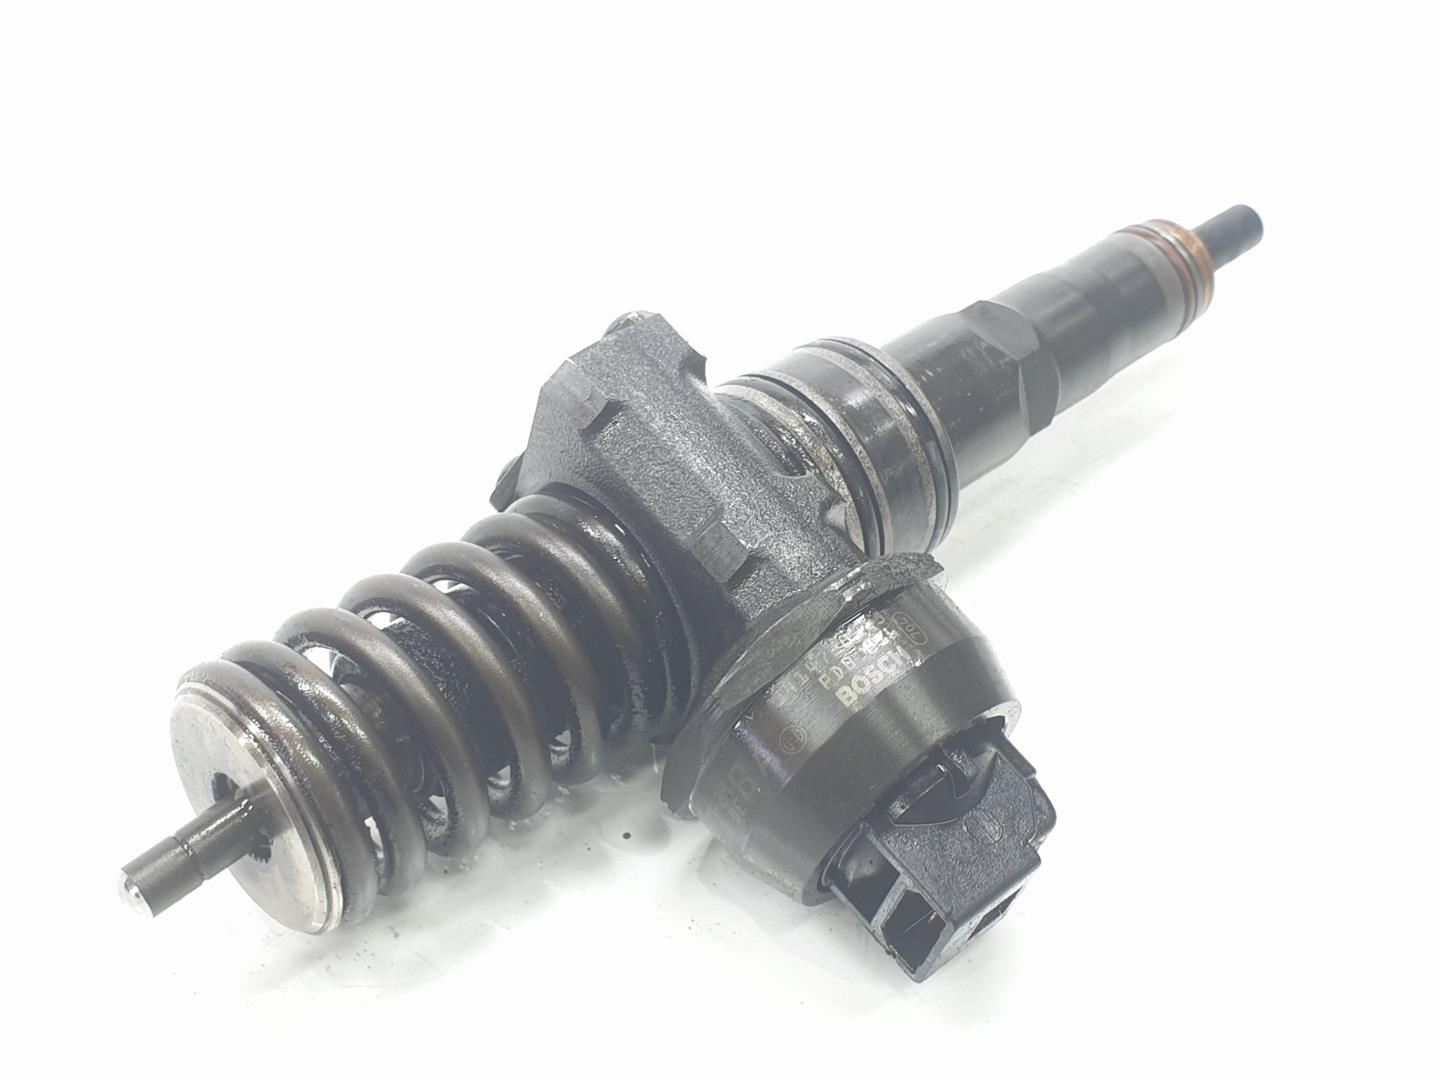 SEAT Ibiza 3 generation (2002-2008) Fuel Injector 038130073AG, 038130073AG, 1141CB 25100045